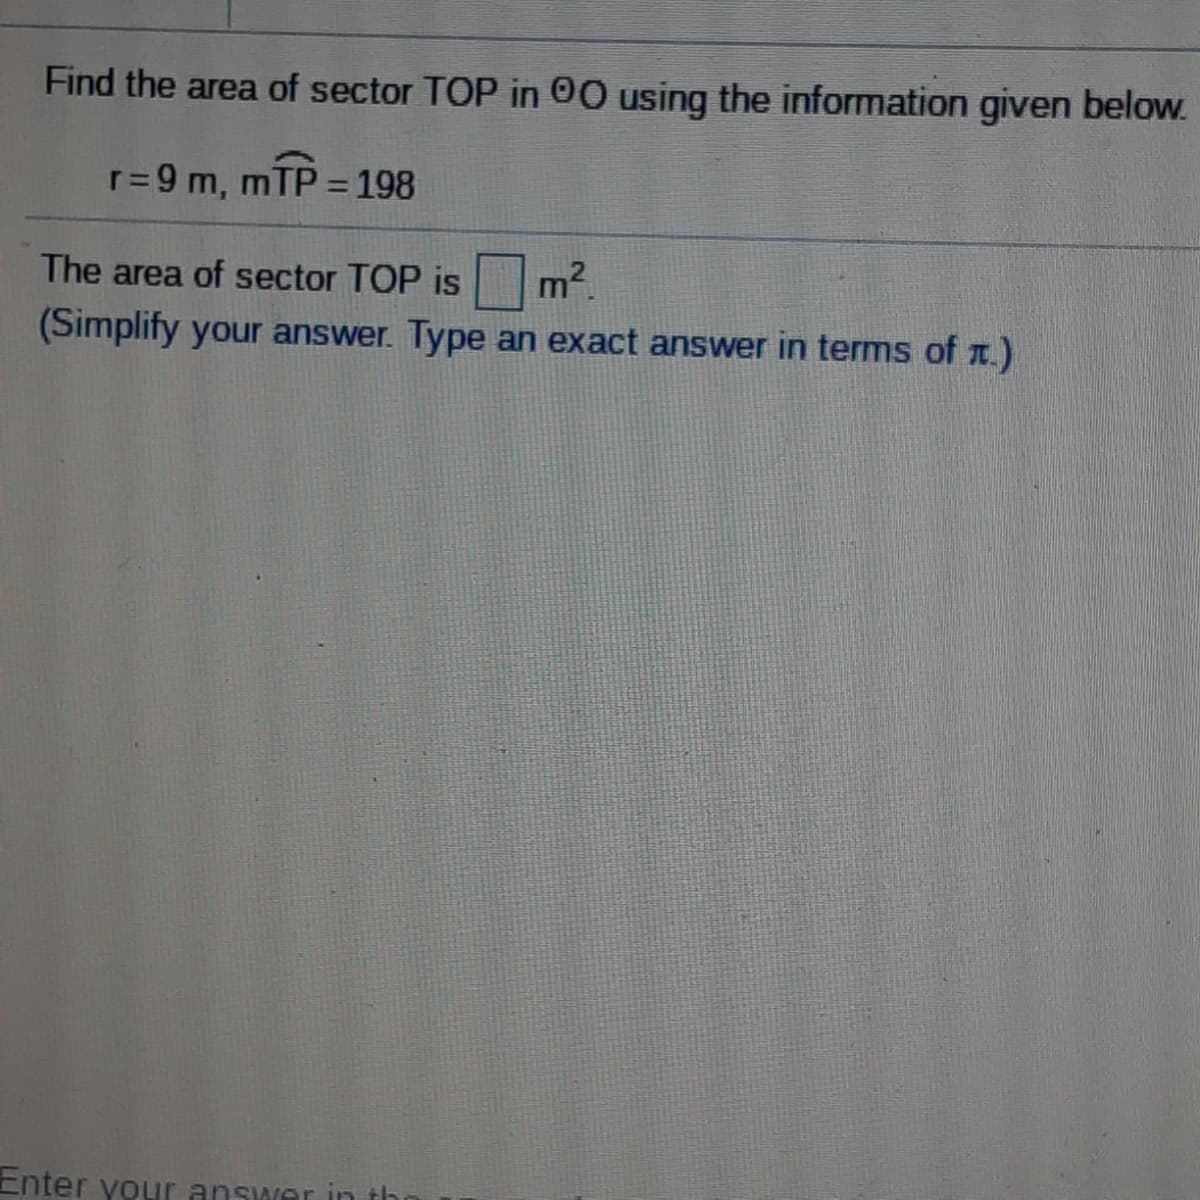 Find the area of sector TOP in 00 using the information given below.
r= 9 m,
mTP = 198
%3D
The area of sector TOP is m2.
(Simplify your answer. Type an exact answer in terms of T.)
Enter yoLir answer in th
